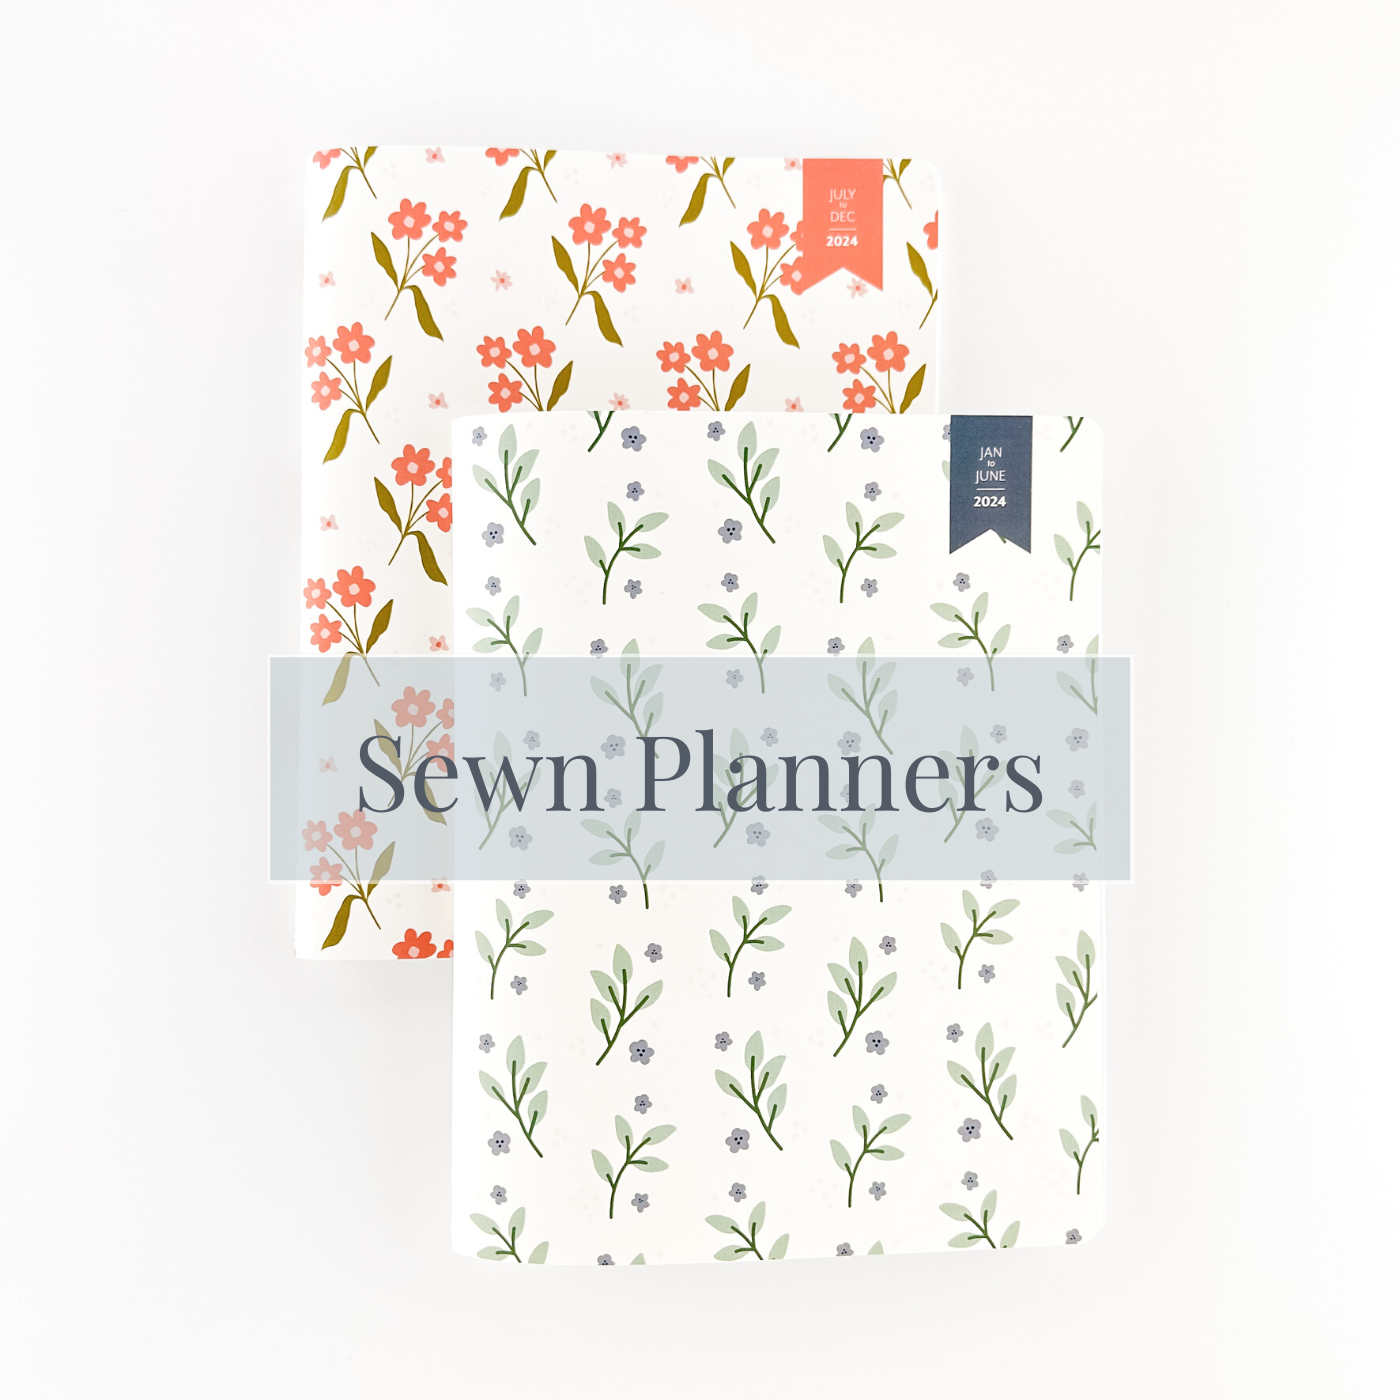 Sewn Planners